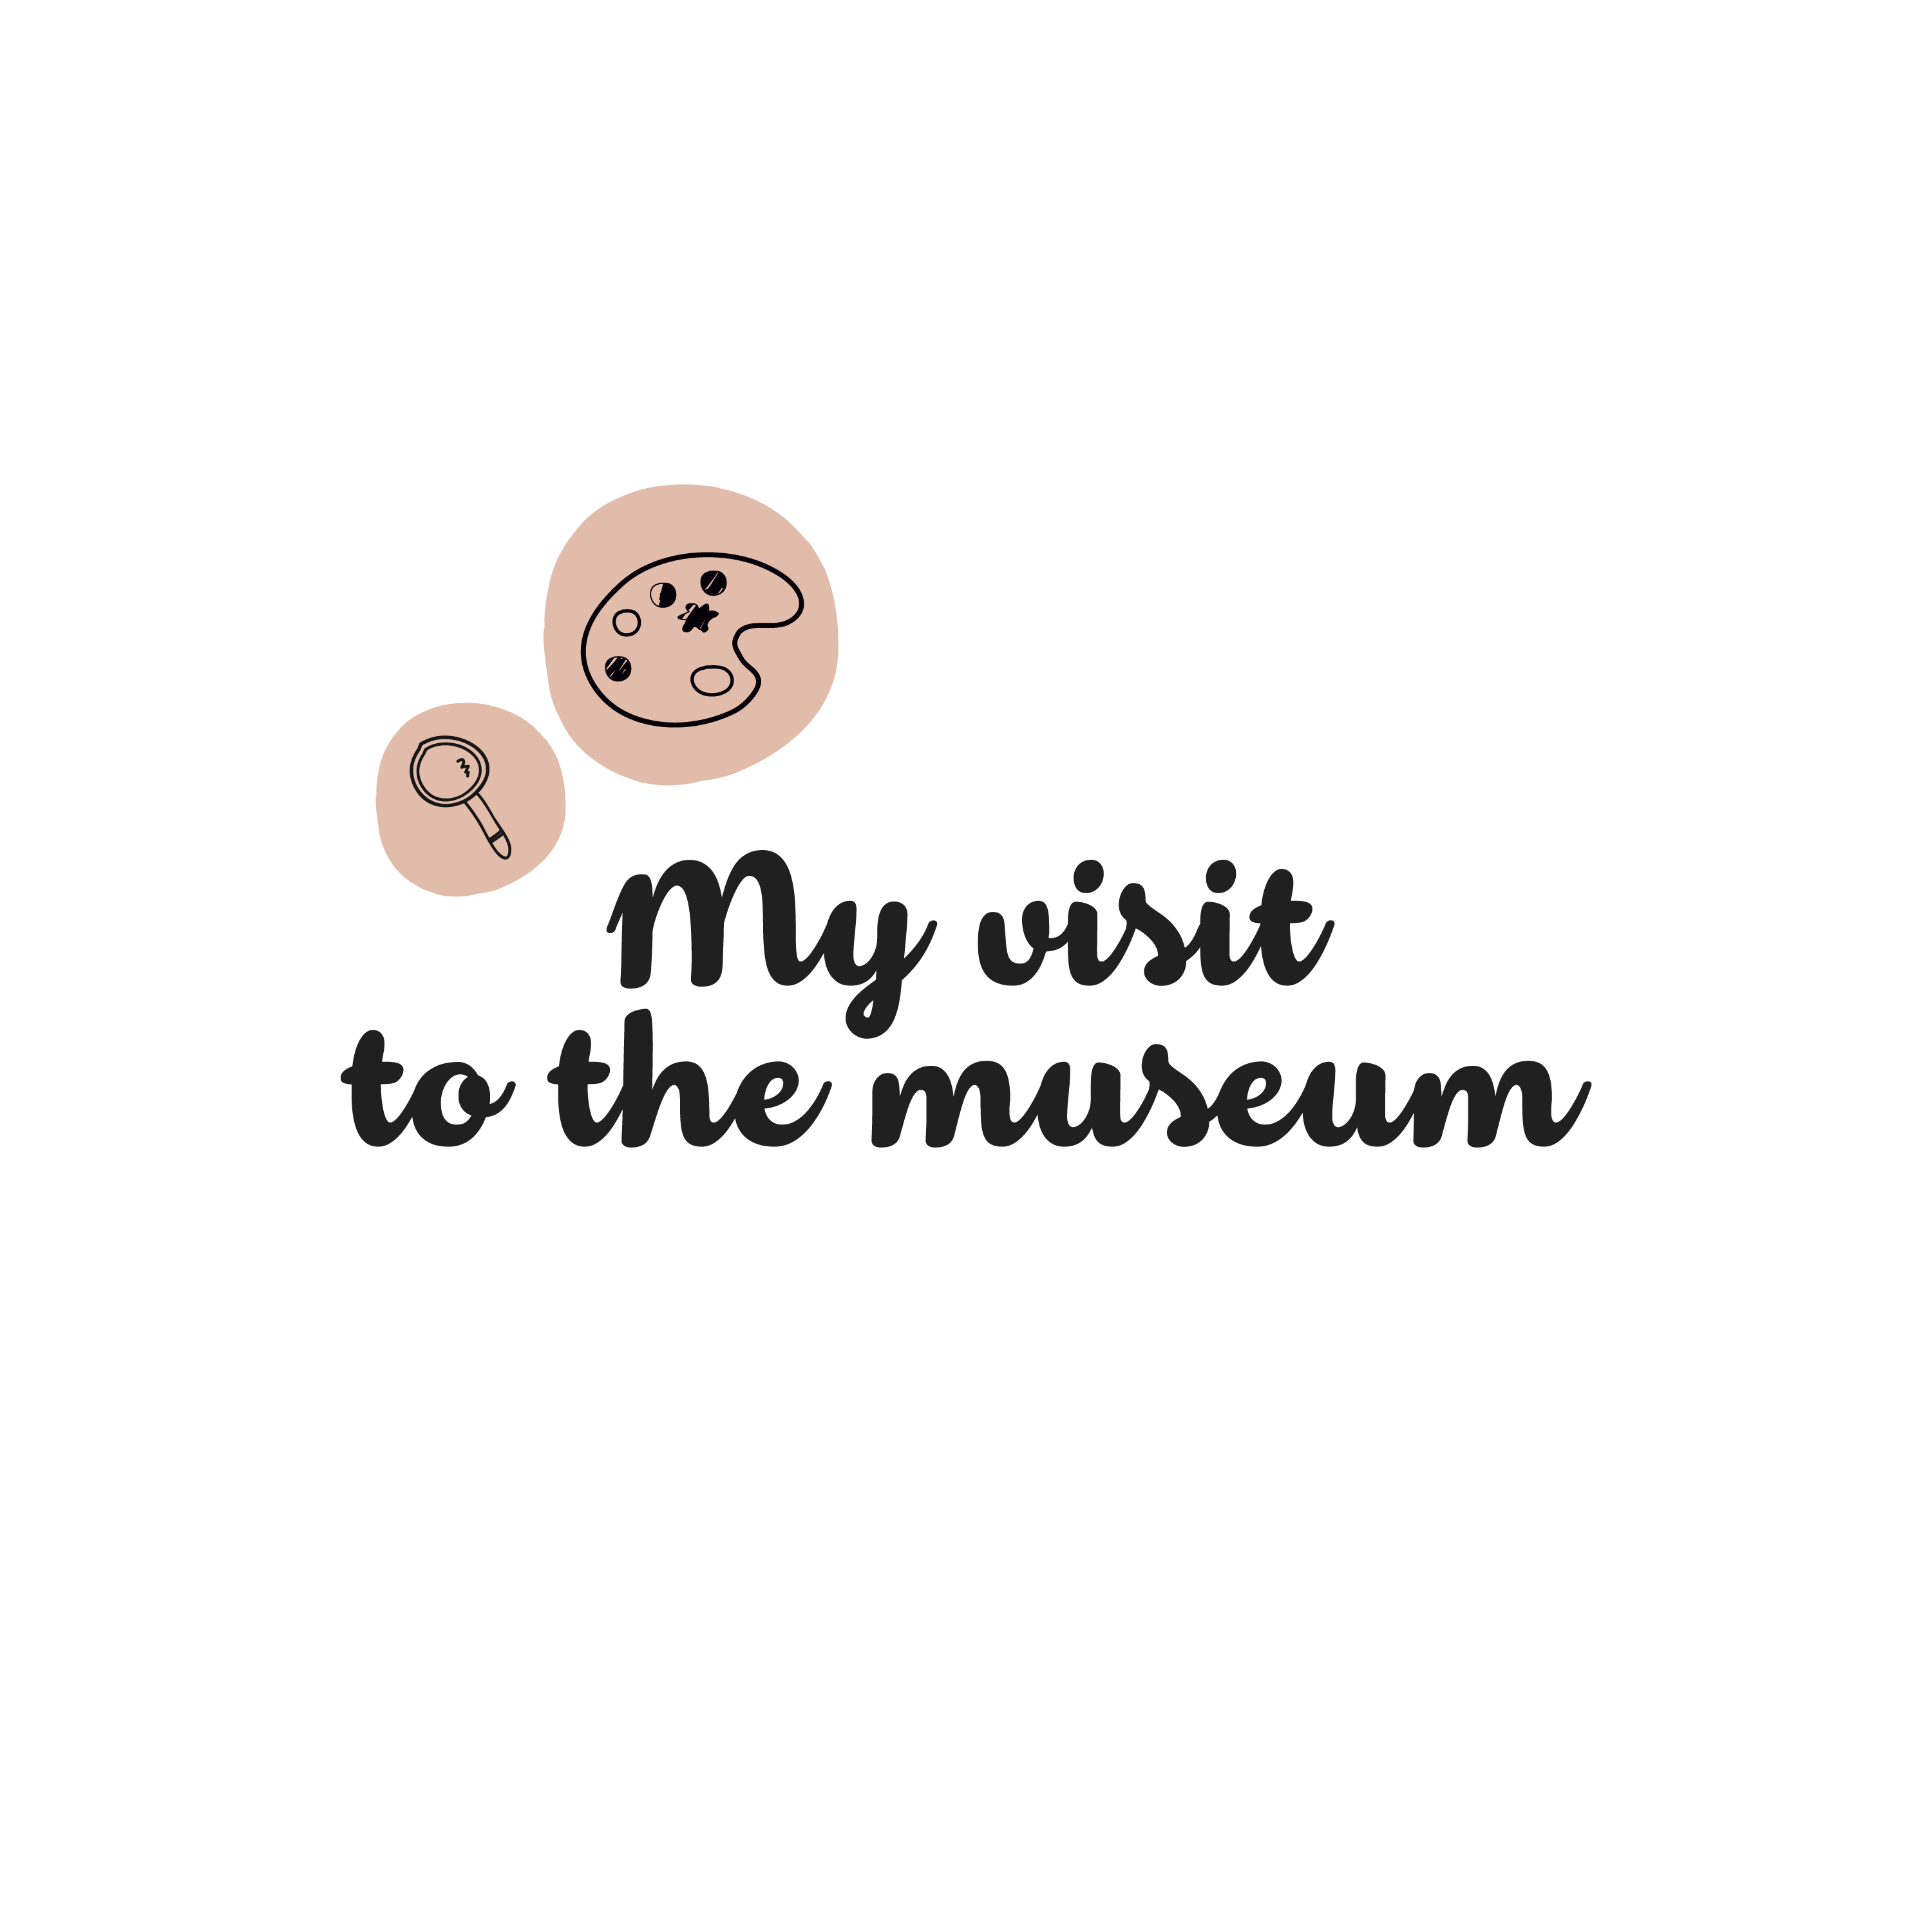 English version of the logo of the My visit to the museum document to print made by Les Belles Combines